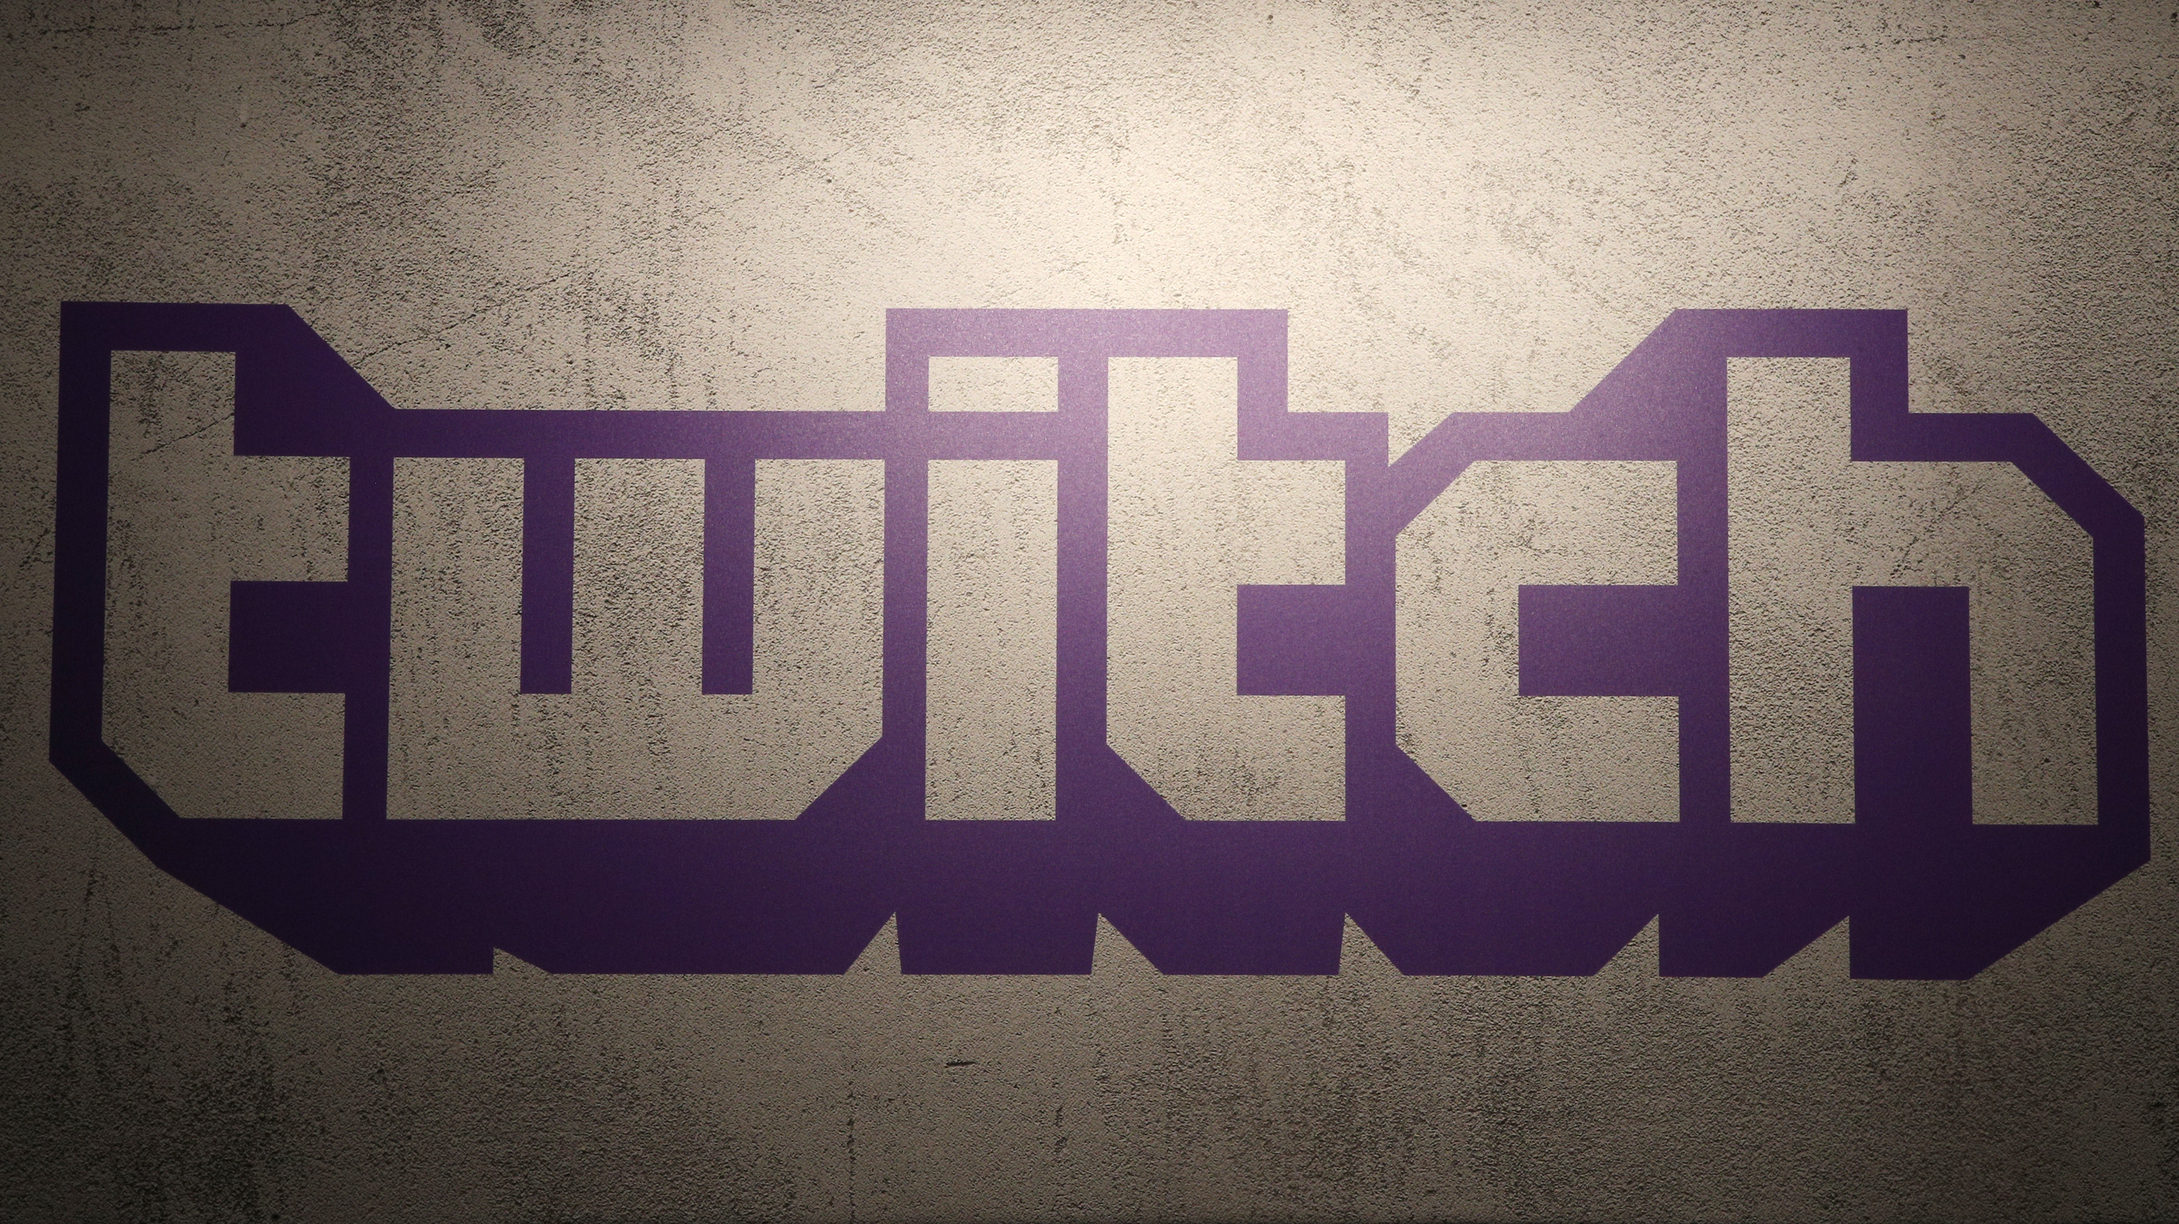 Going Live With Twitch Content Creators – Advertising Week